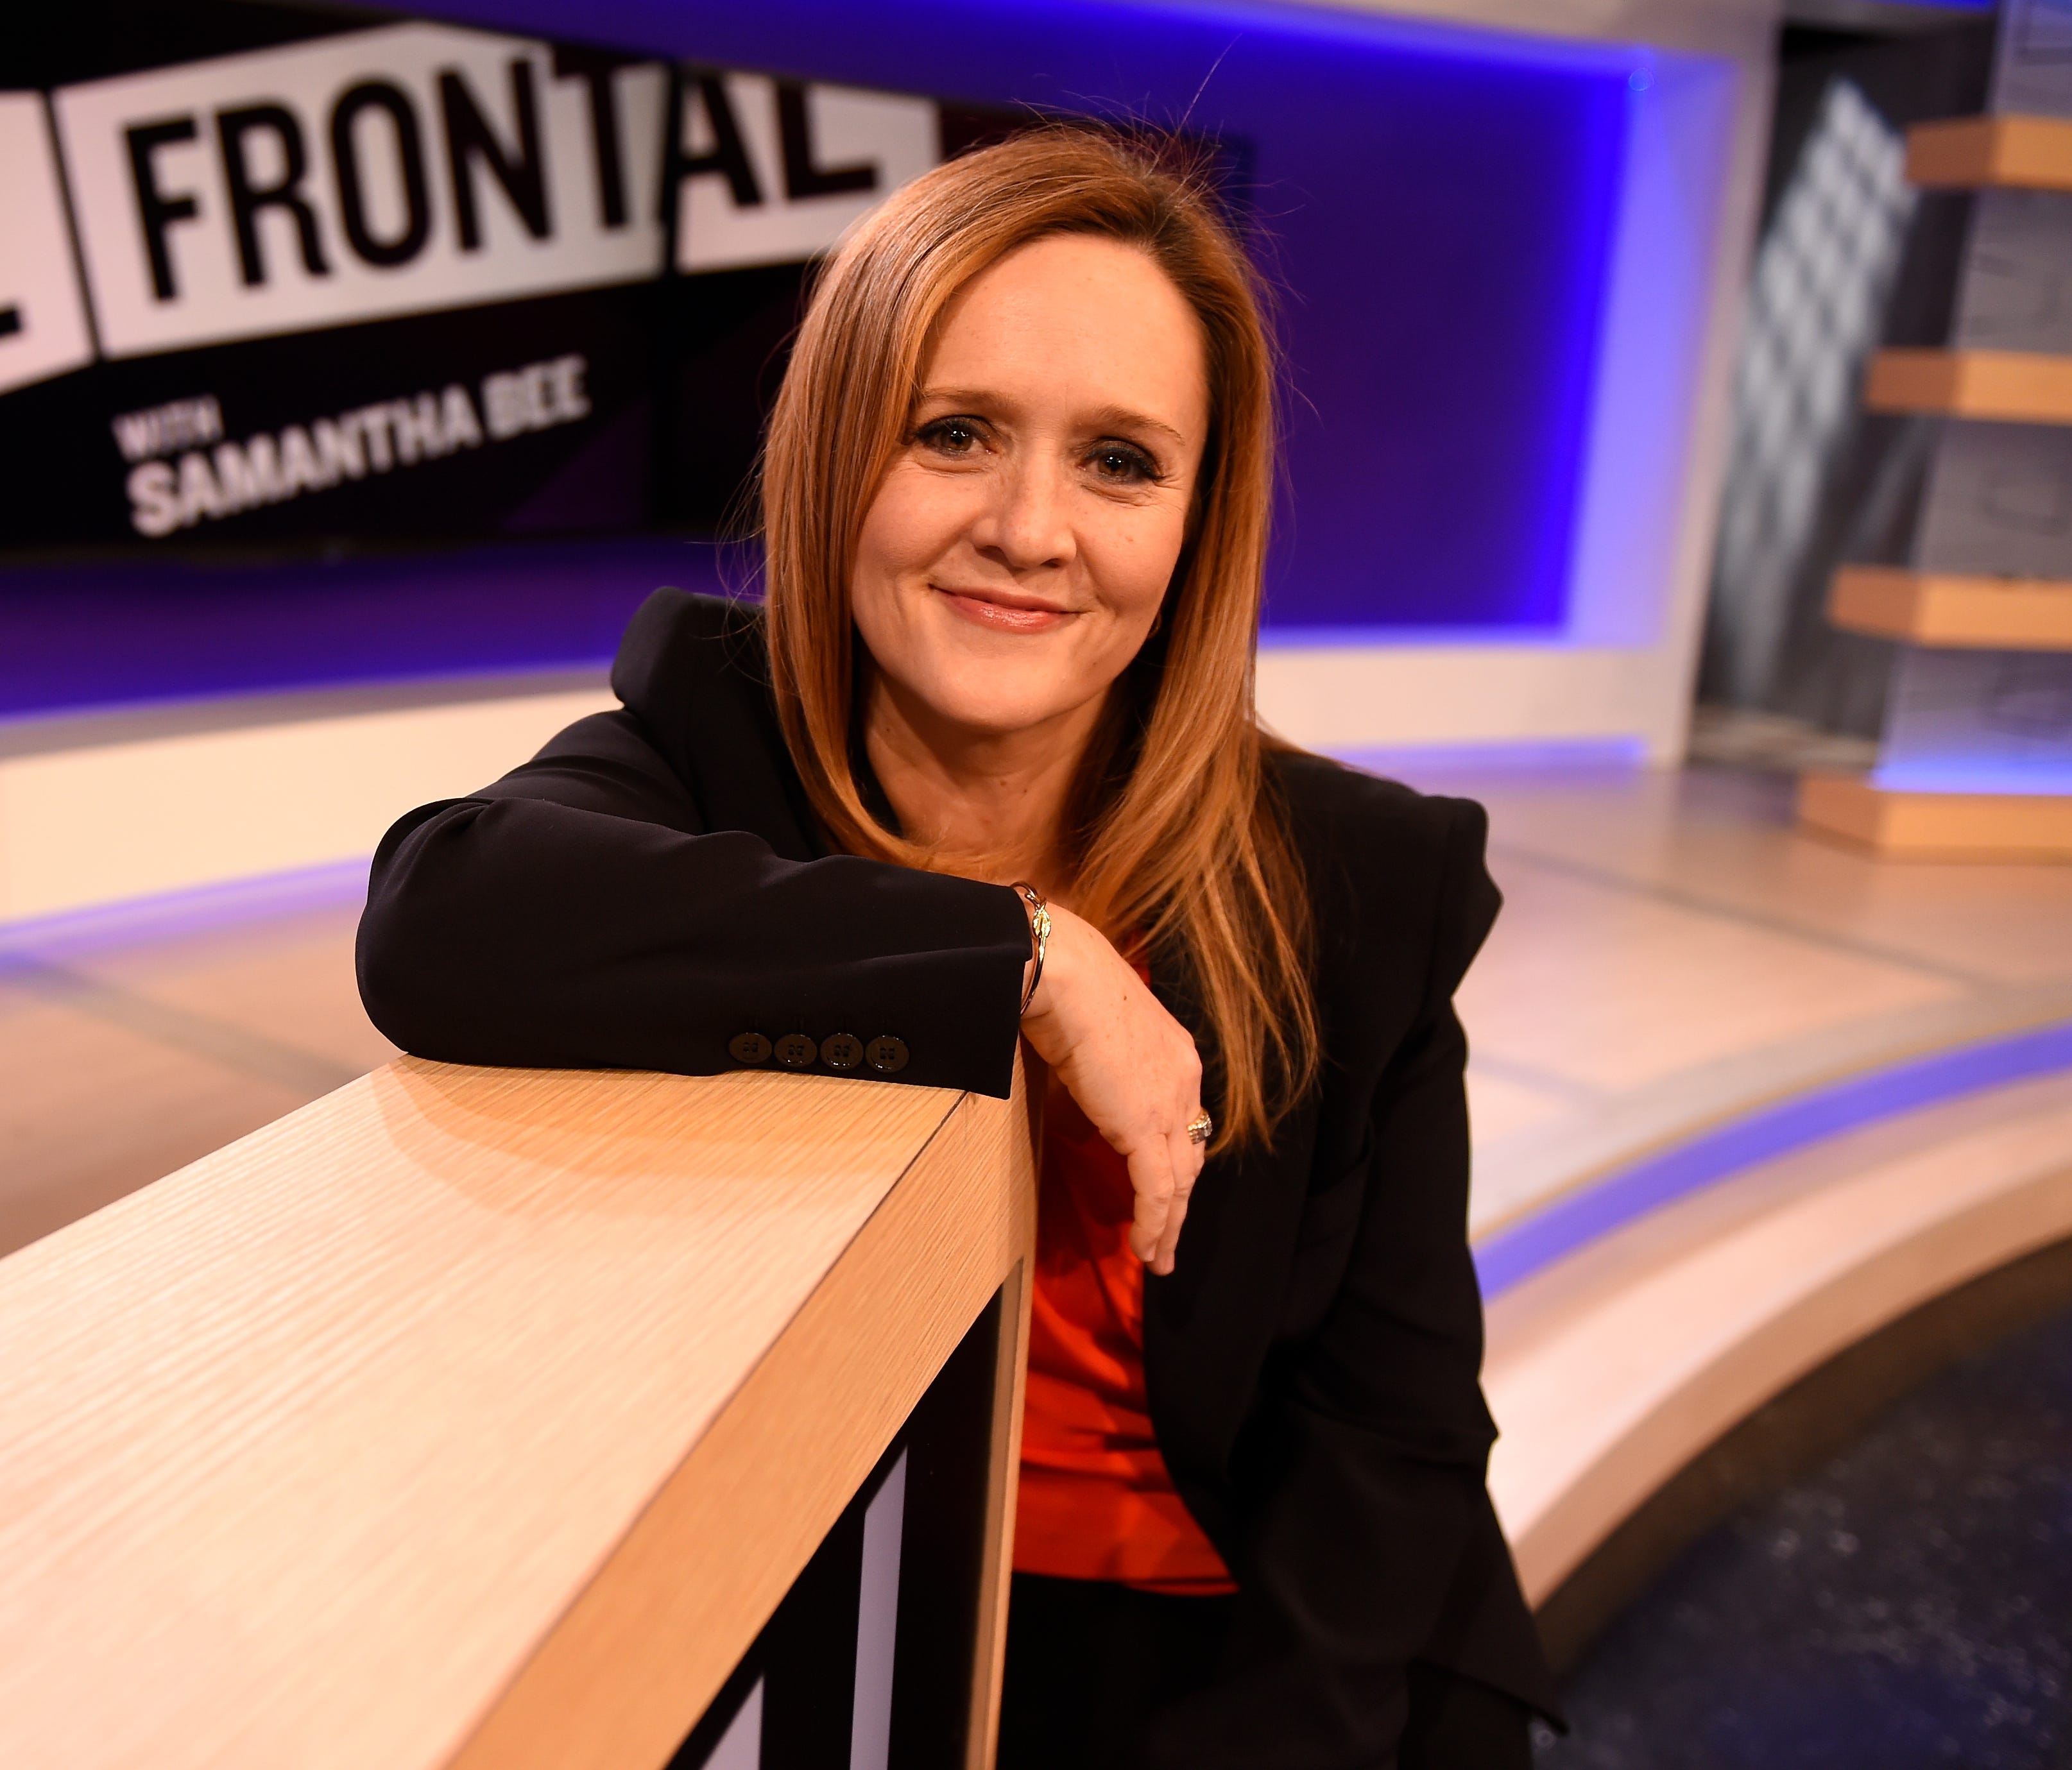 Samantha Bee is host, producer and writer for 